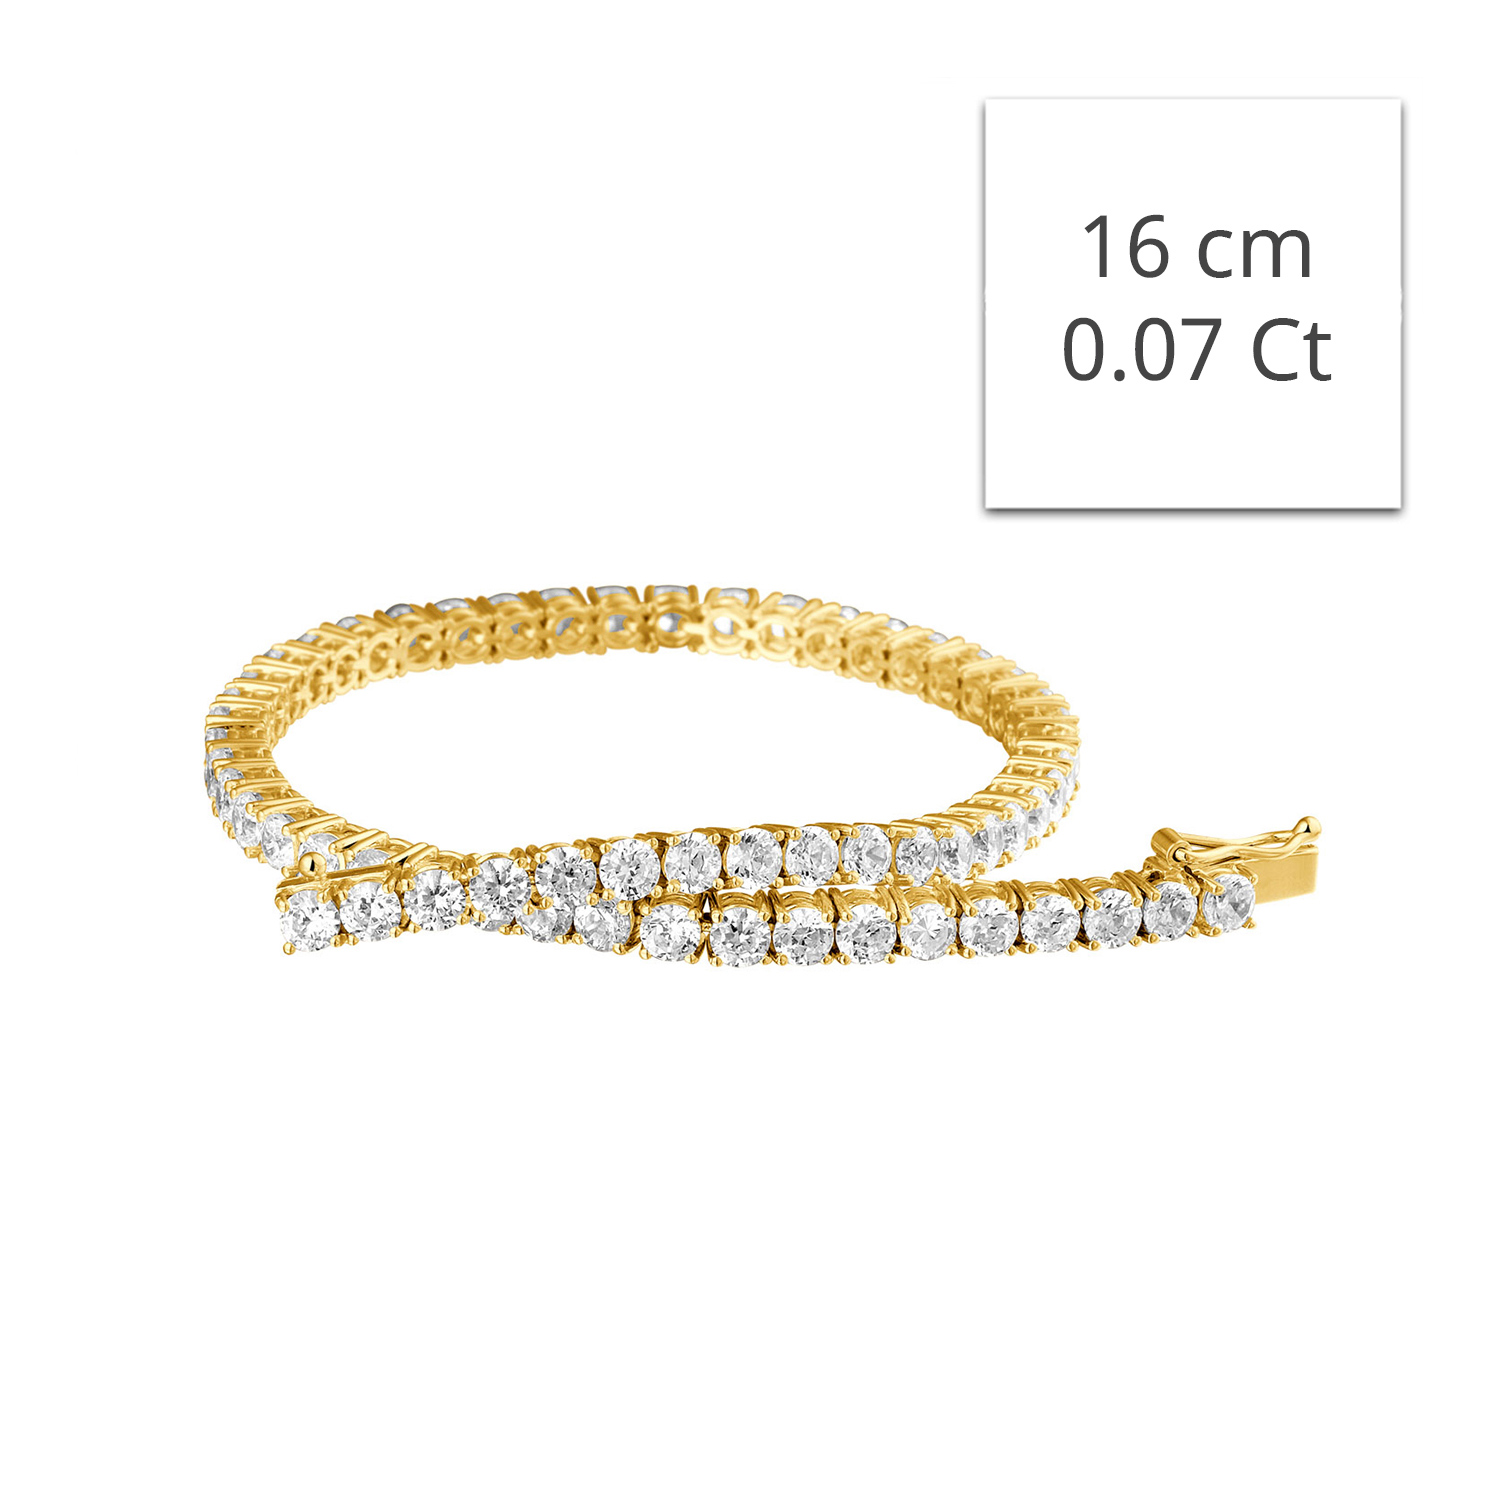 Should you choose a bracelet in white or yellow gold?